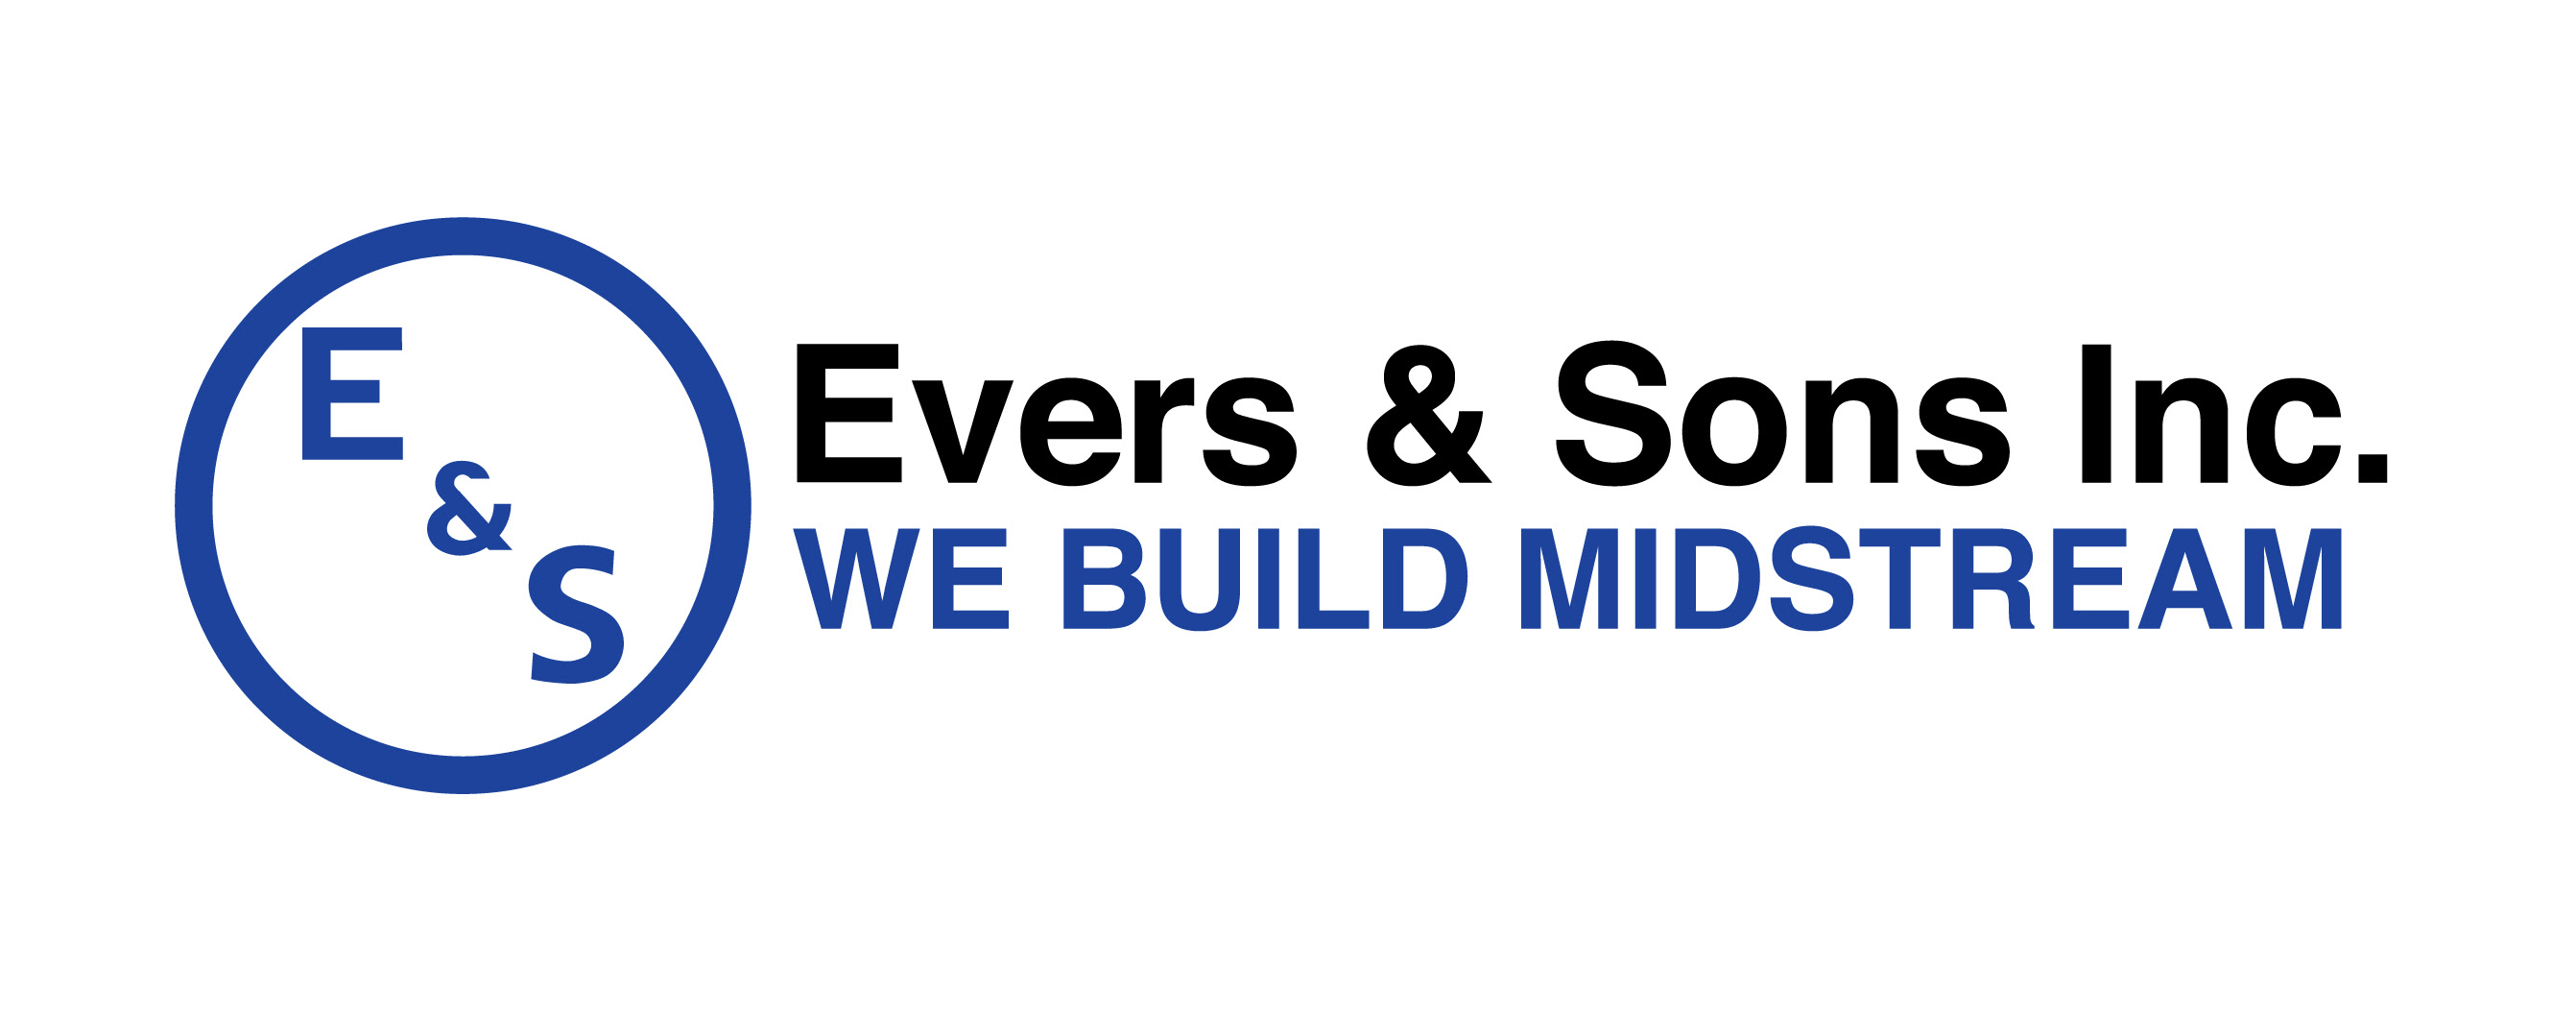 Evers and Sons Incident Investigation Report